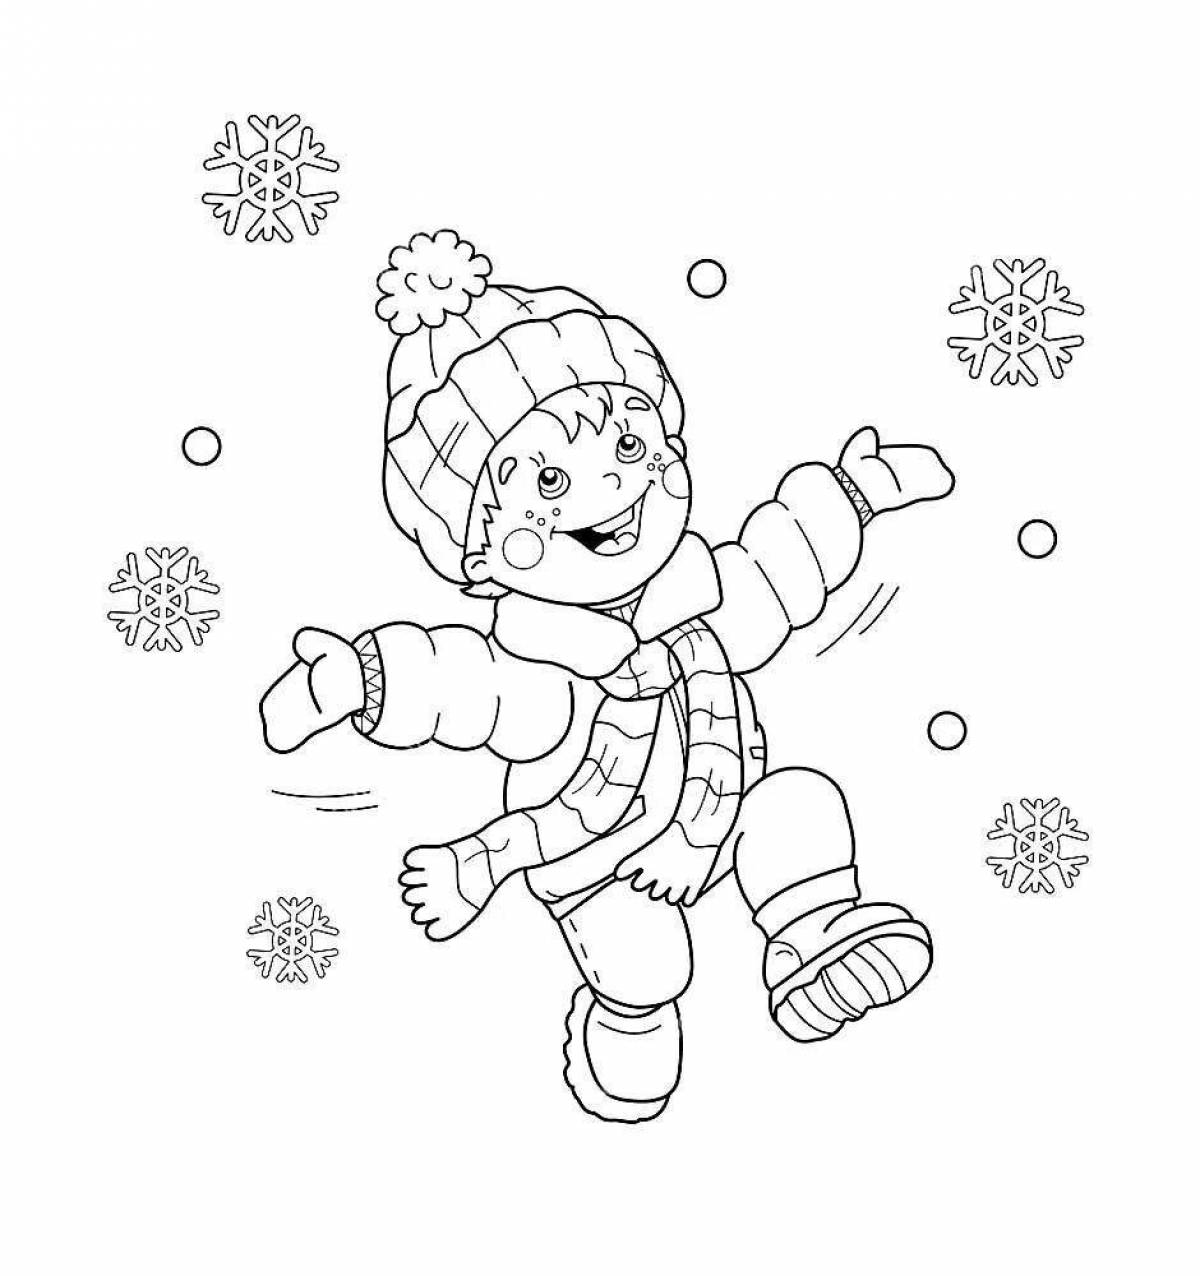 Bright coloring for children boy in winter clothes